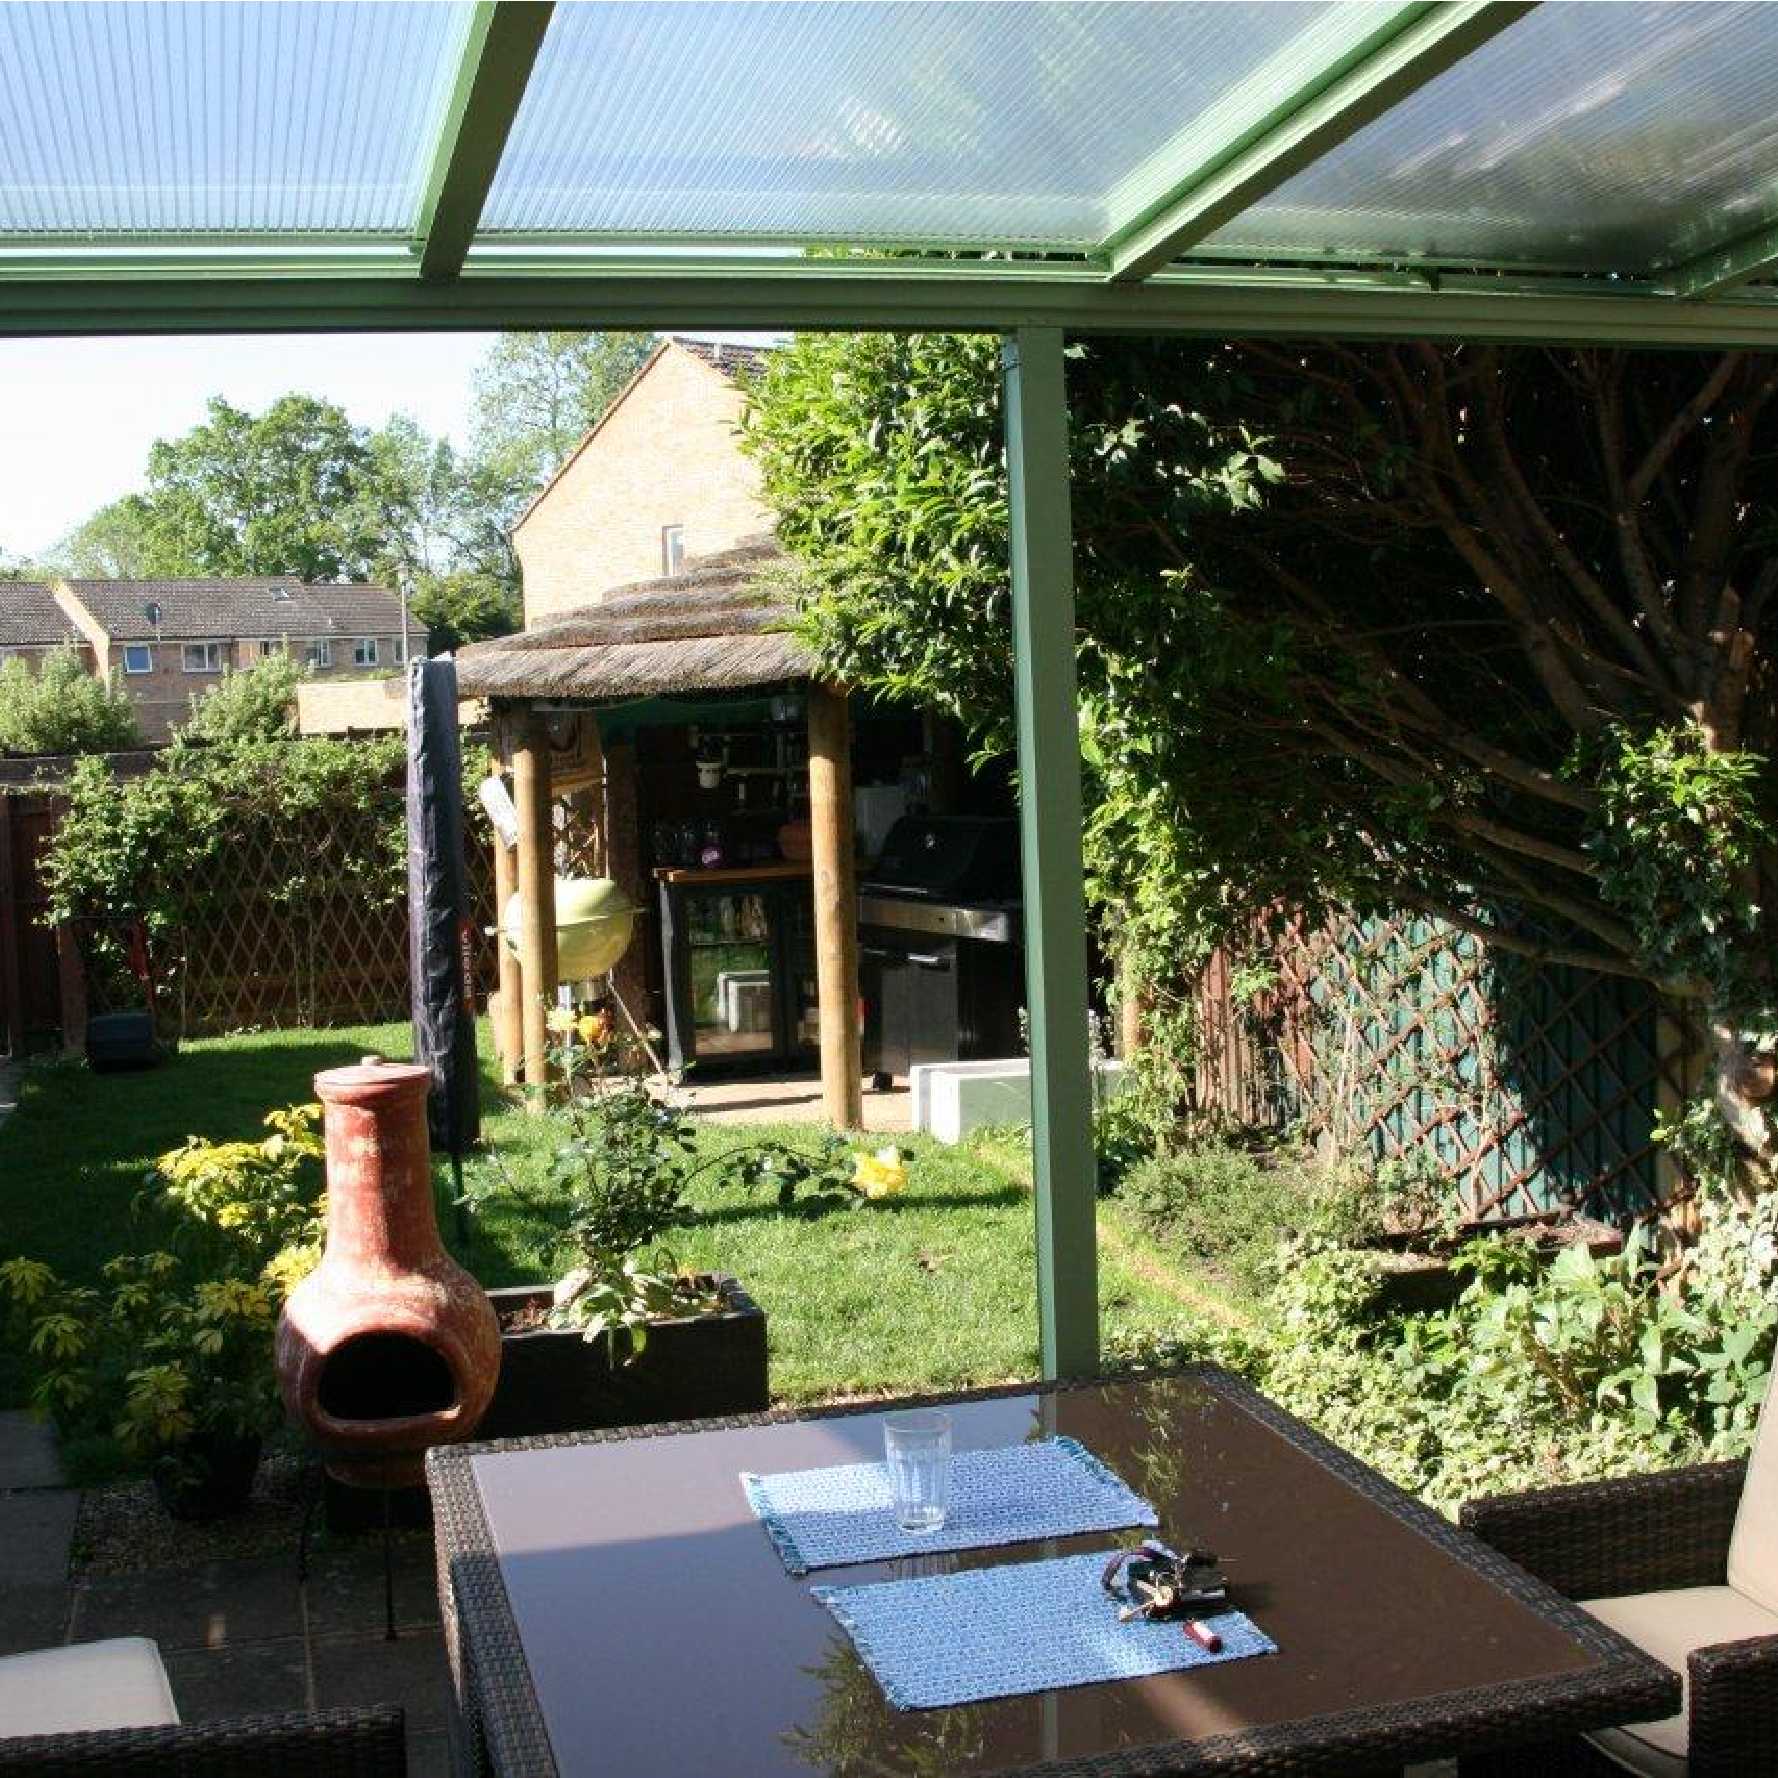 Affordable Omega Smart Lean-To Canopy, White with 16mm Polycarbonate Glazing - 11.6m (W) x 2.0m (P), (5) Supporting Posts